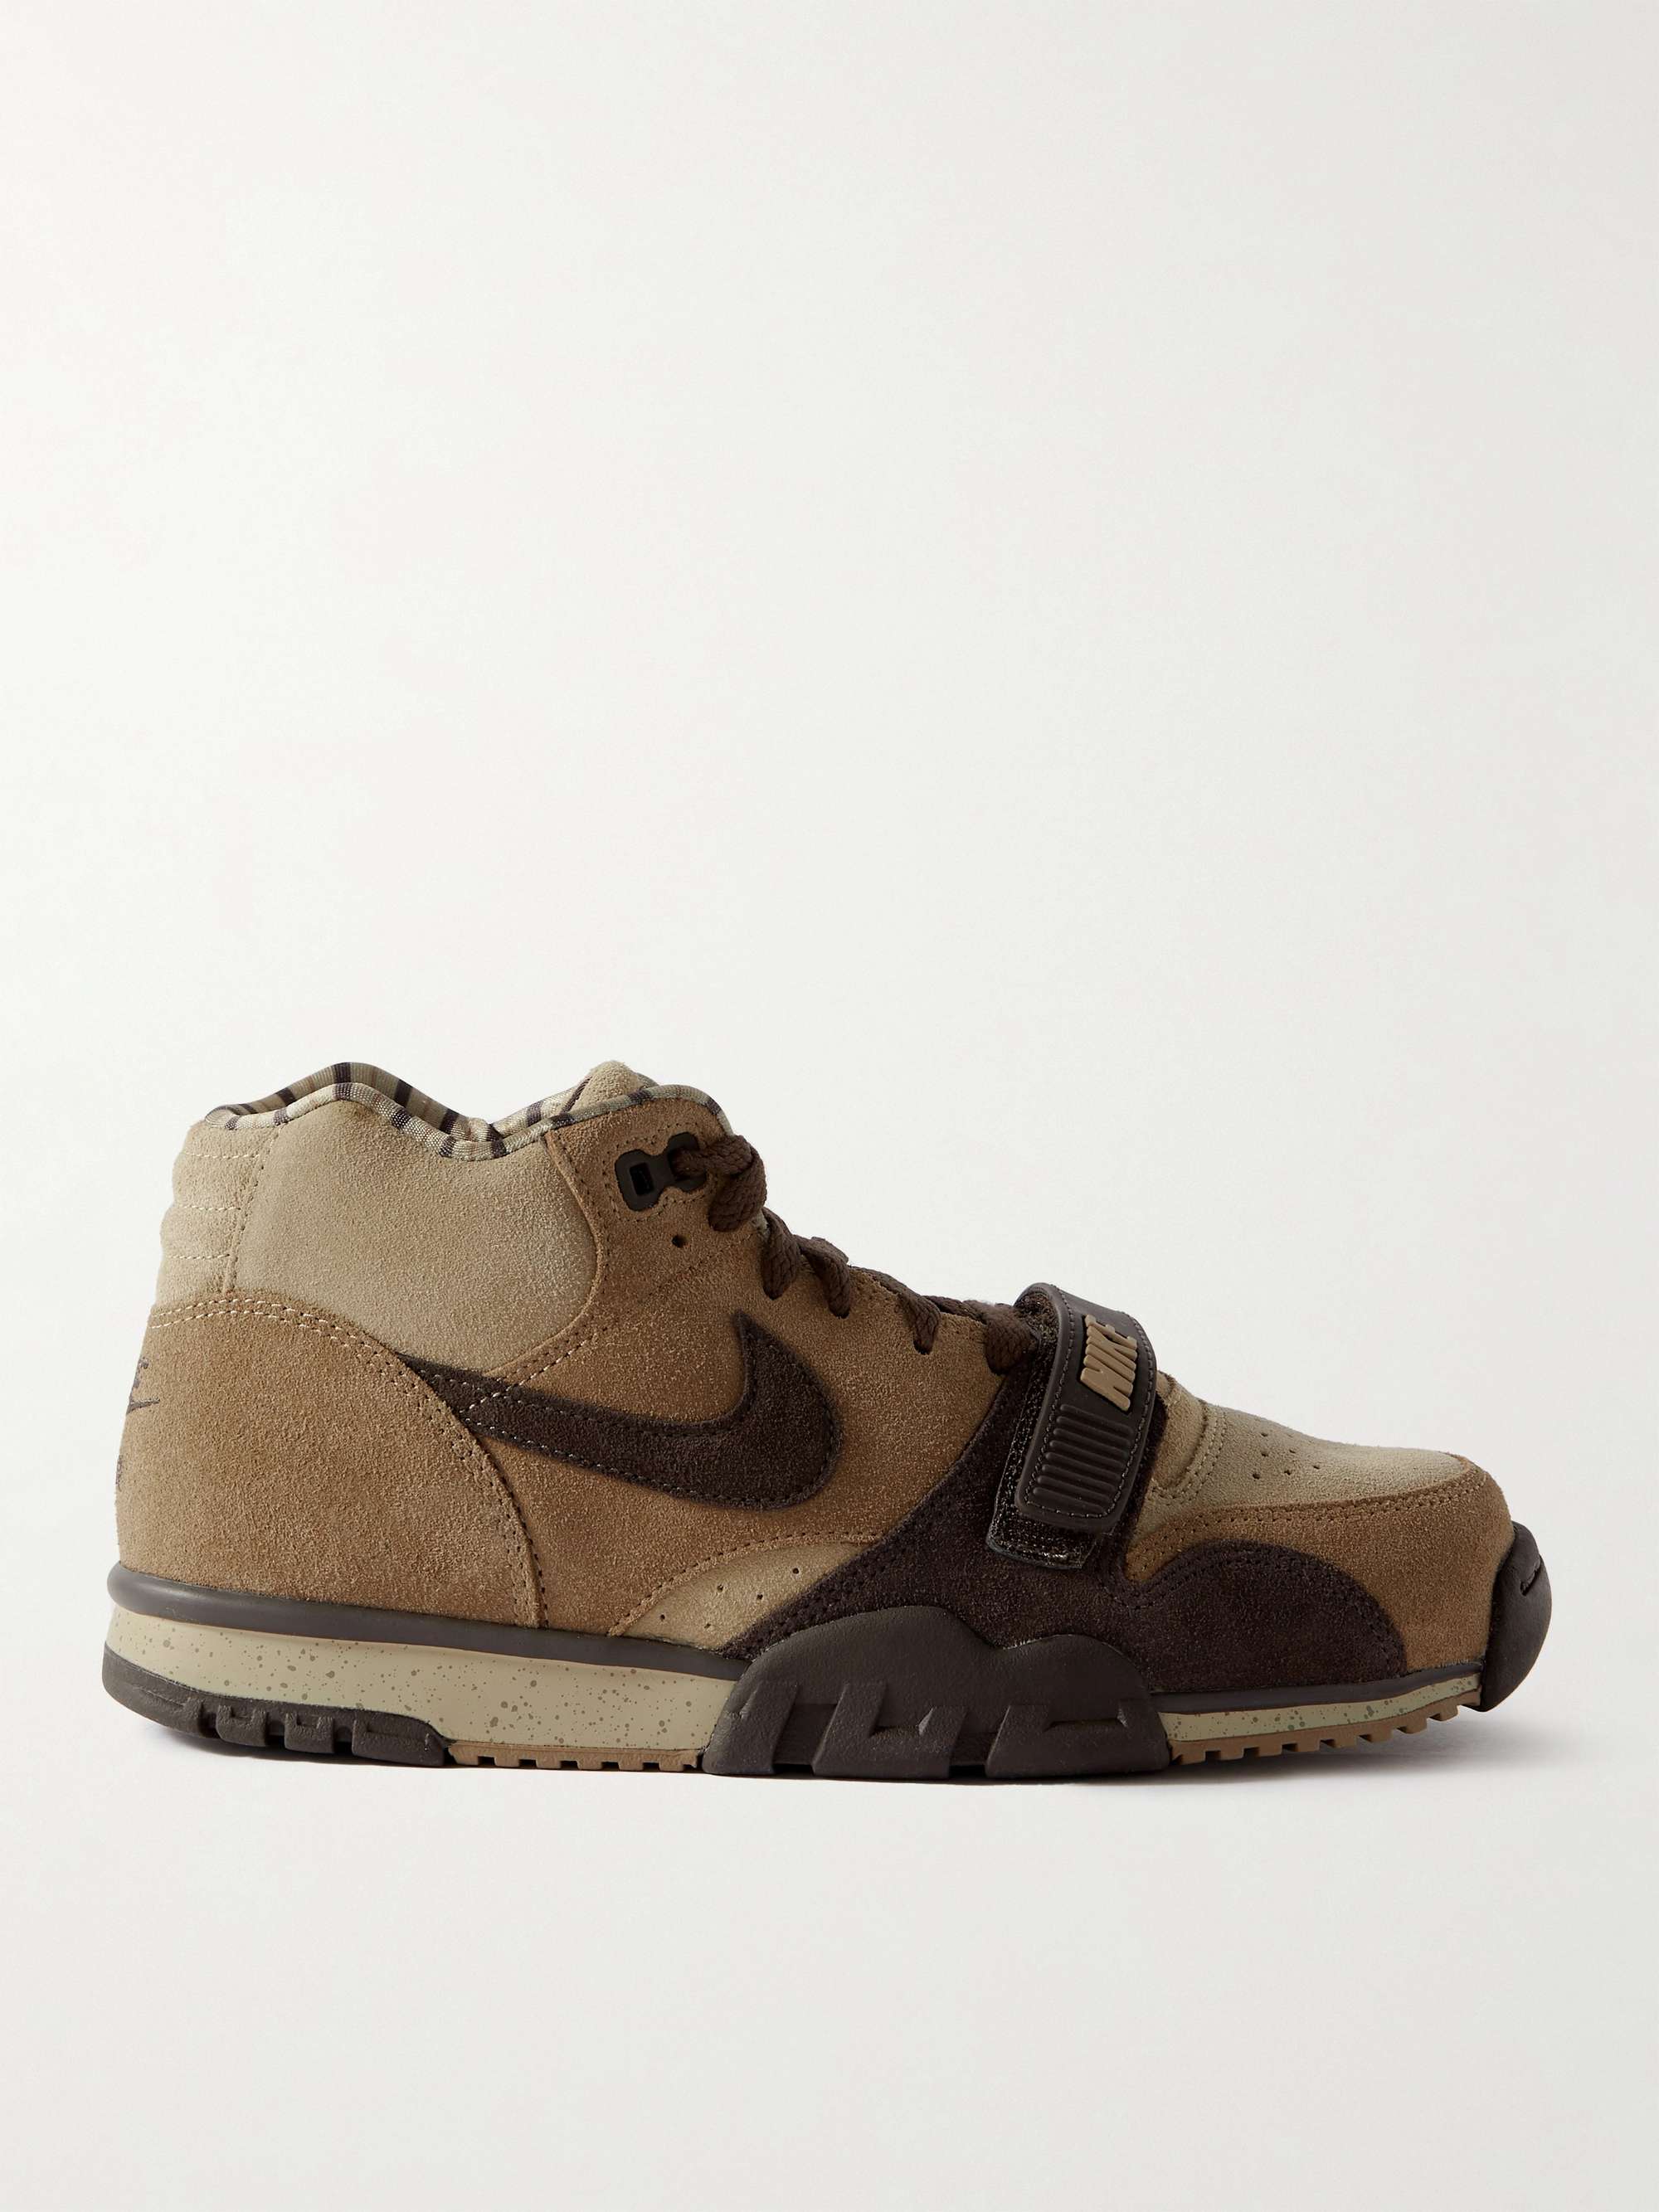 NIKE Air Trainer 1 Leather-Trimmed Suede Sneakers | MR PORTER